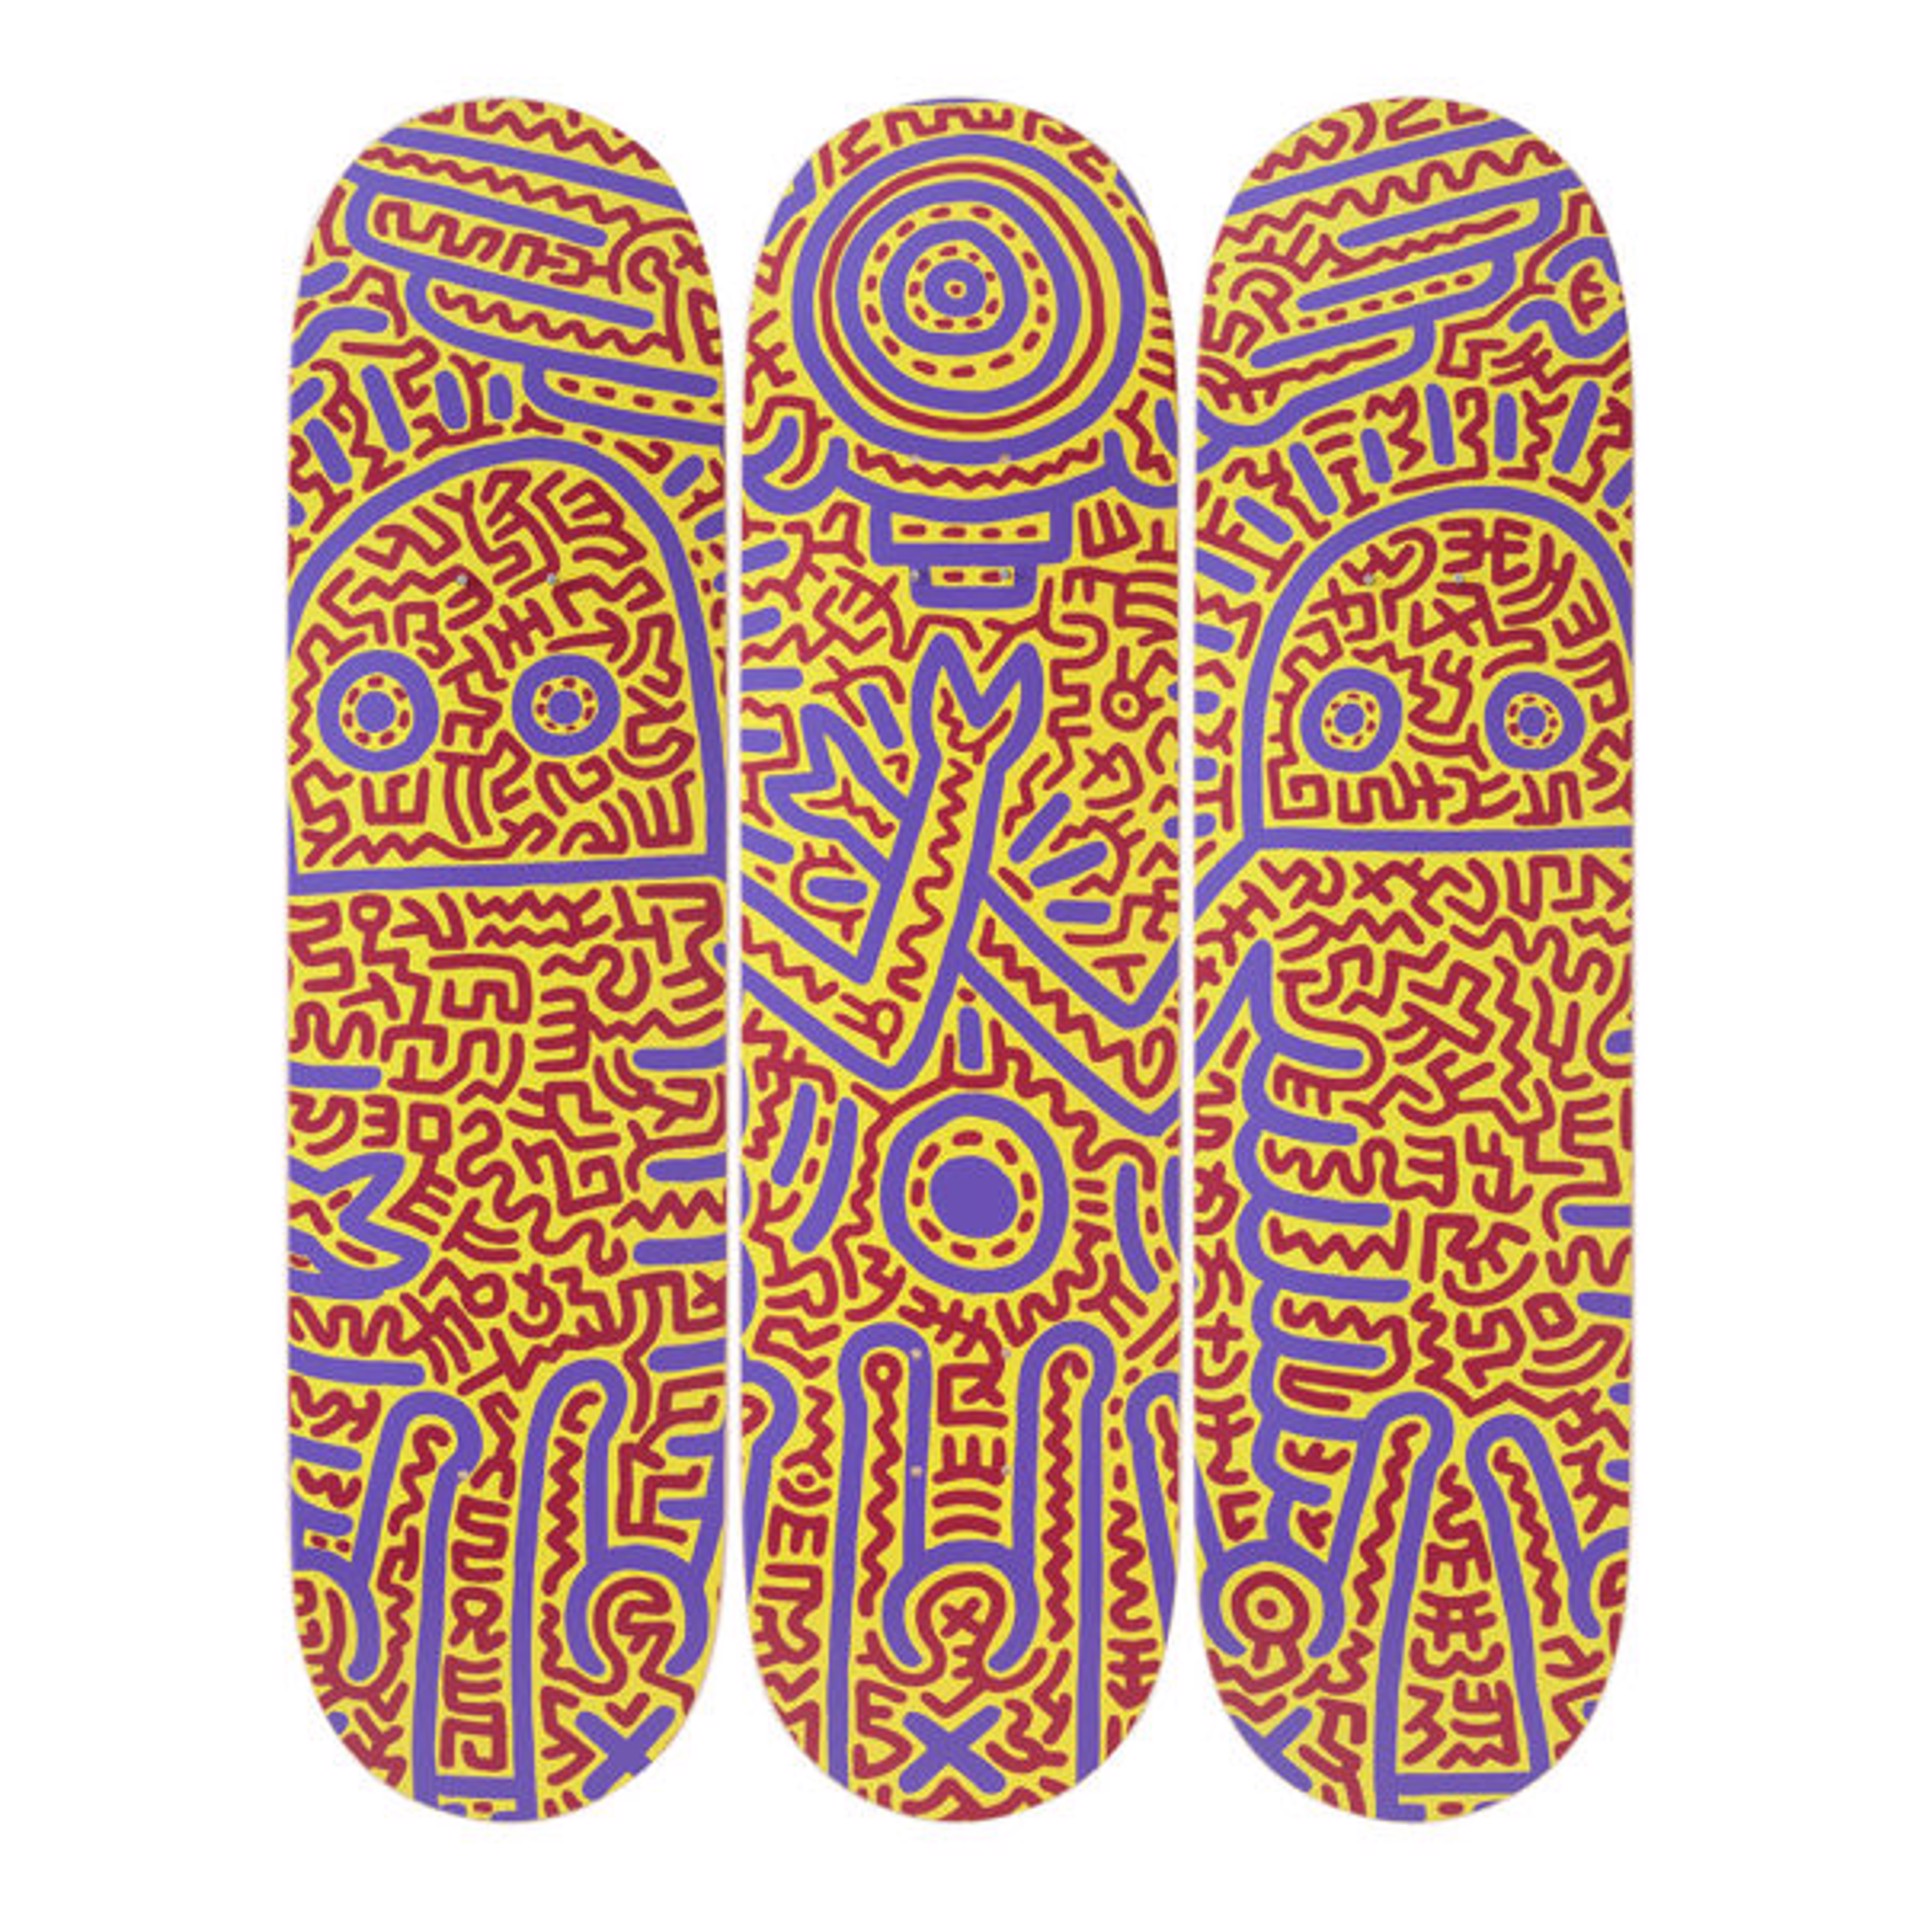 Untitled 1984 Skate Deck by Keith Haring